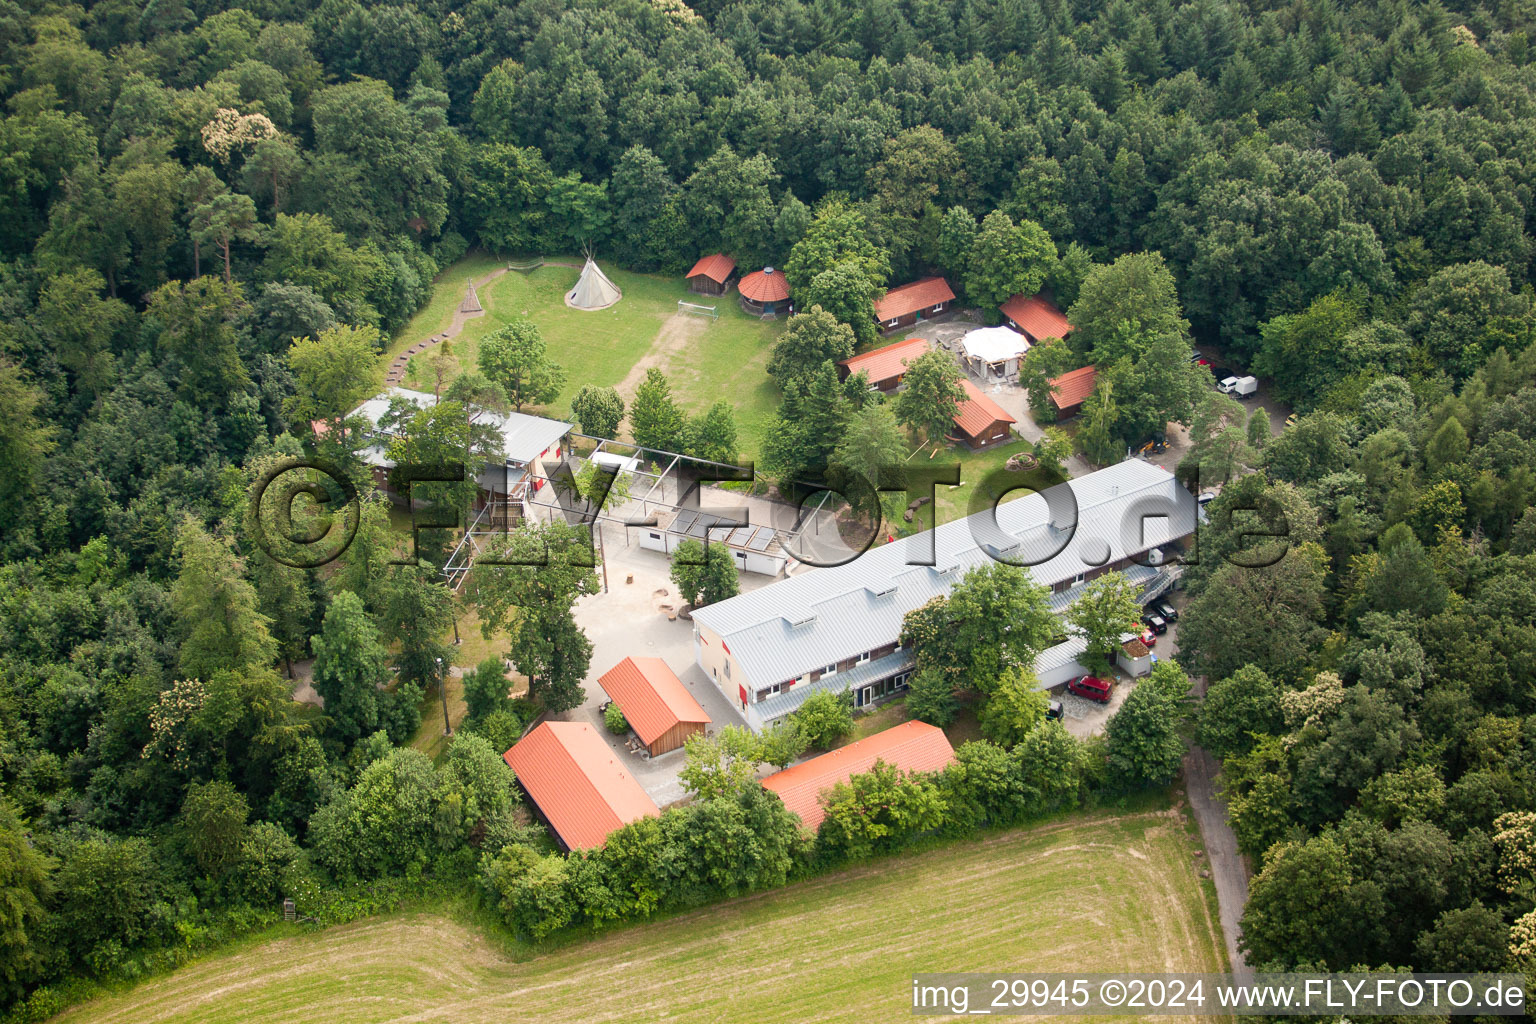 Forest Pirate Camp in the district Rohrbach in Heidelberg in the state Baden-Wuerttemberg, Germany from above